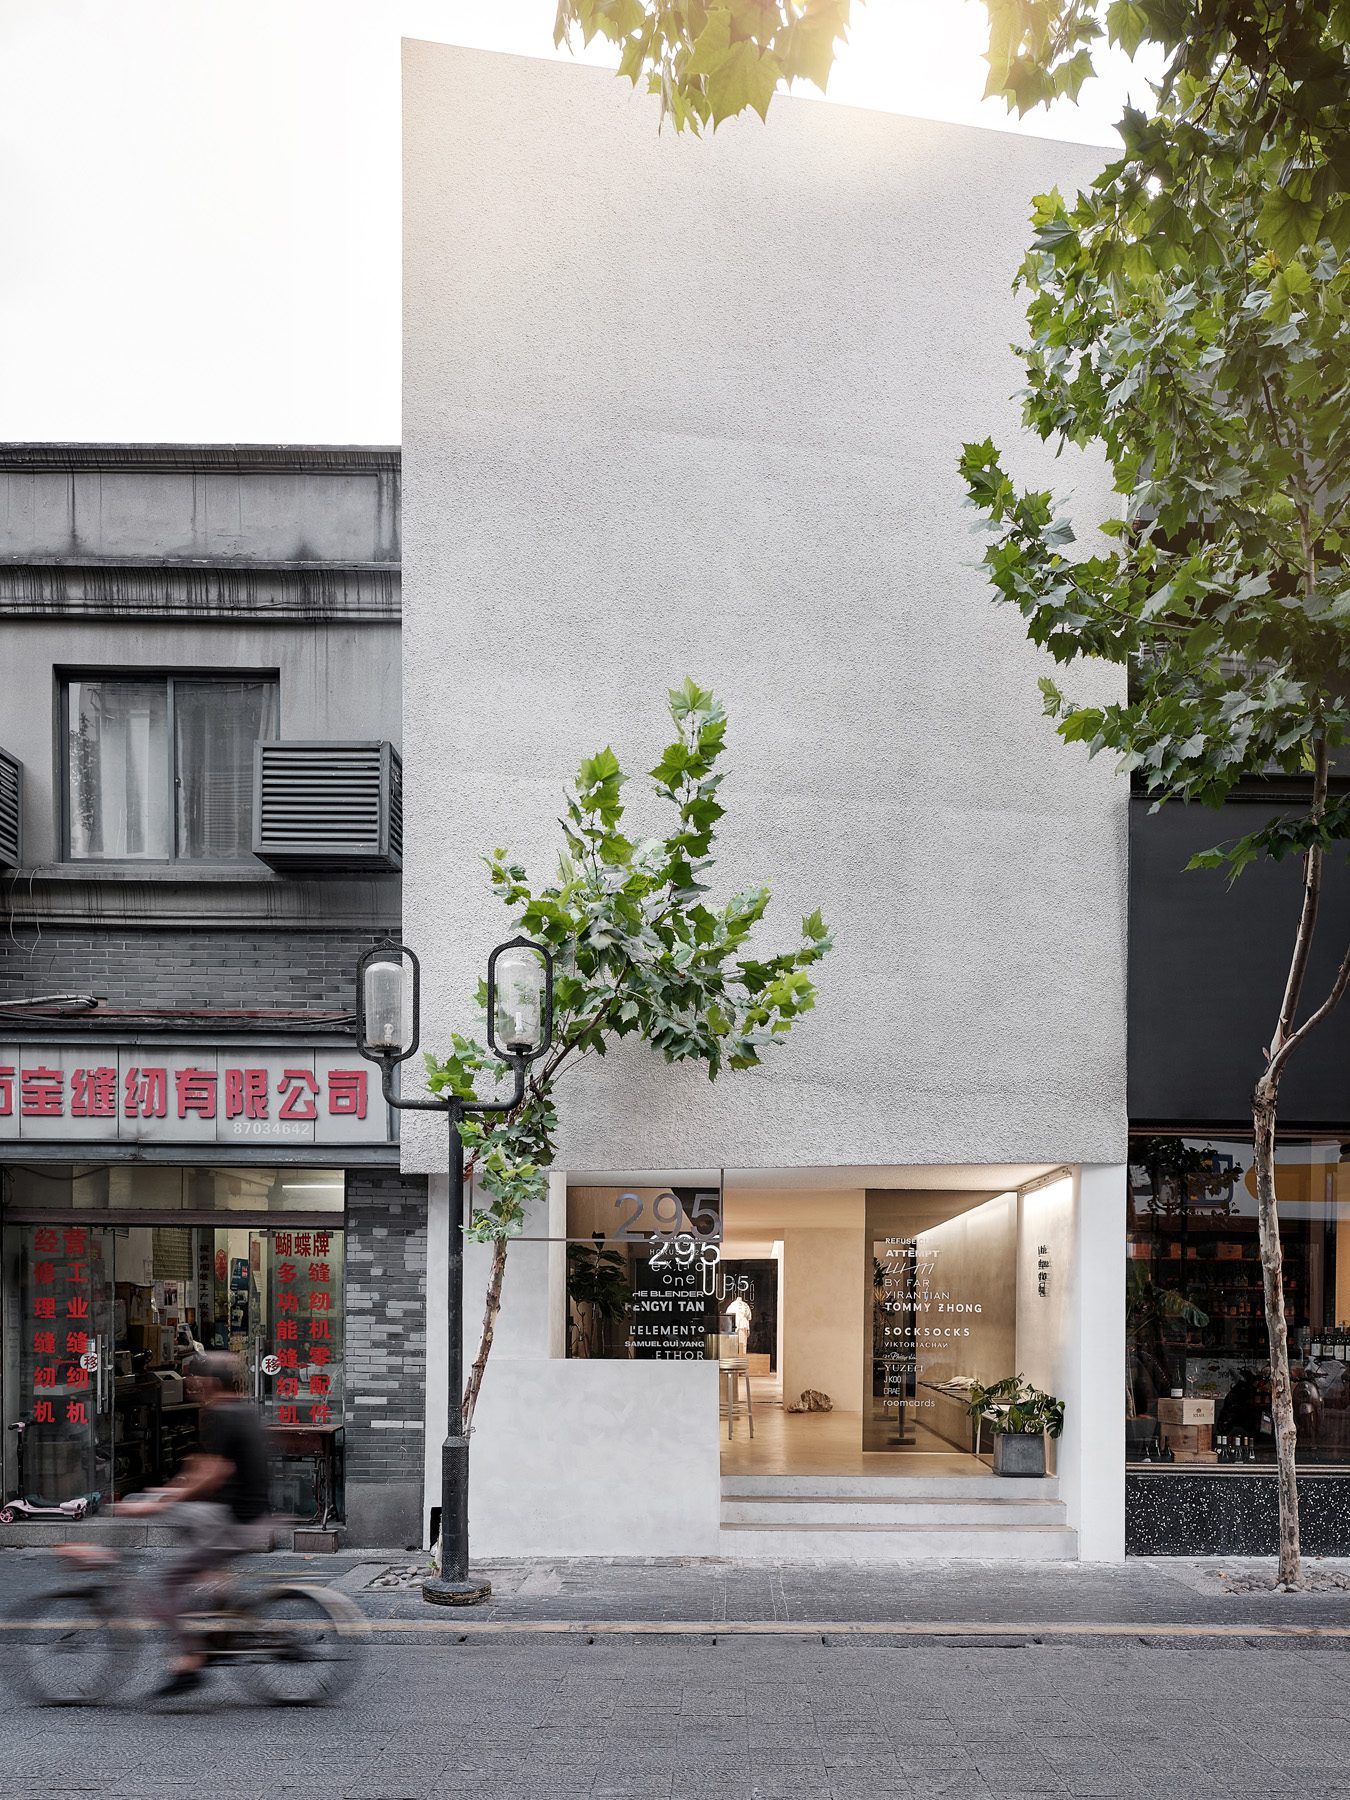 SCENERY ALLEY | Hangzhou Becó295 select store and creative space, by TEAM_BLDG, China 3